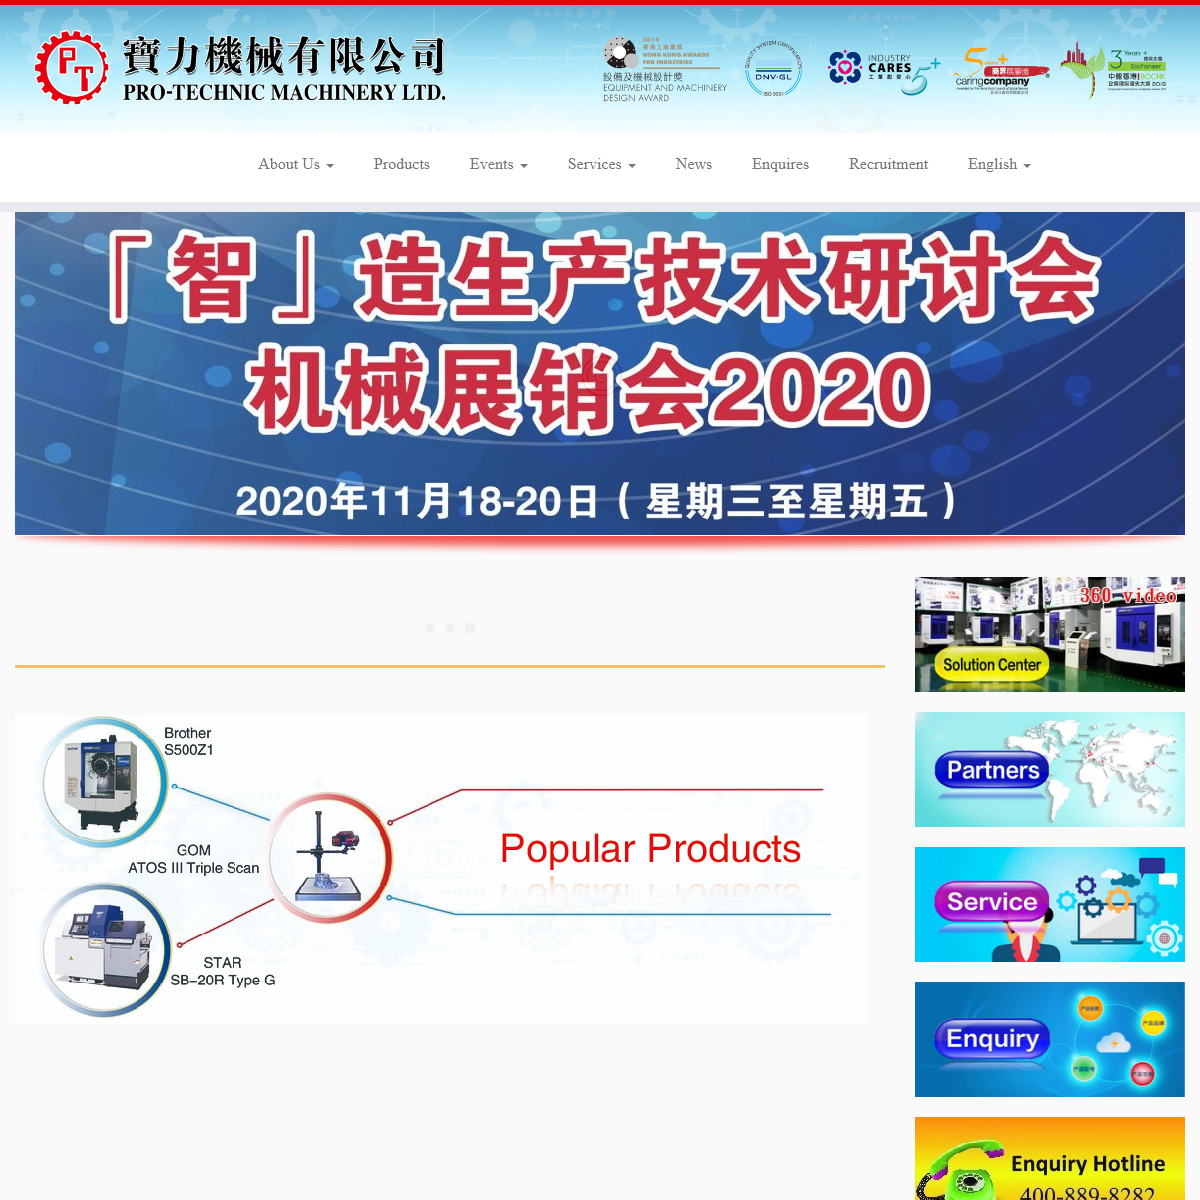 A complete backup of protechnic.com.hk